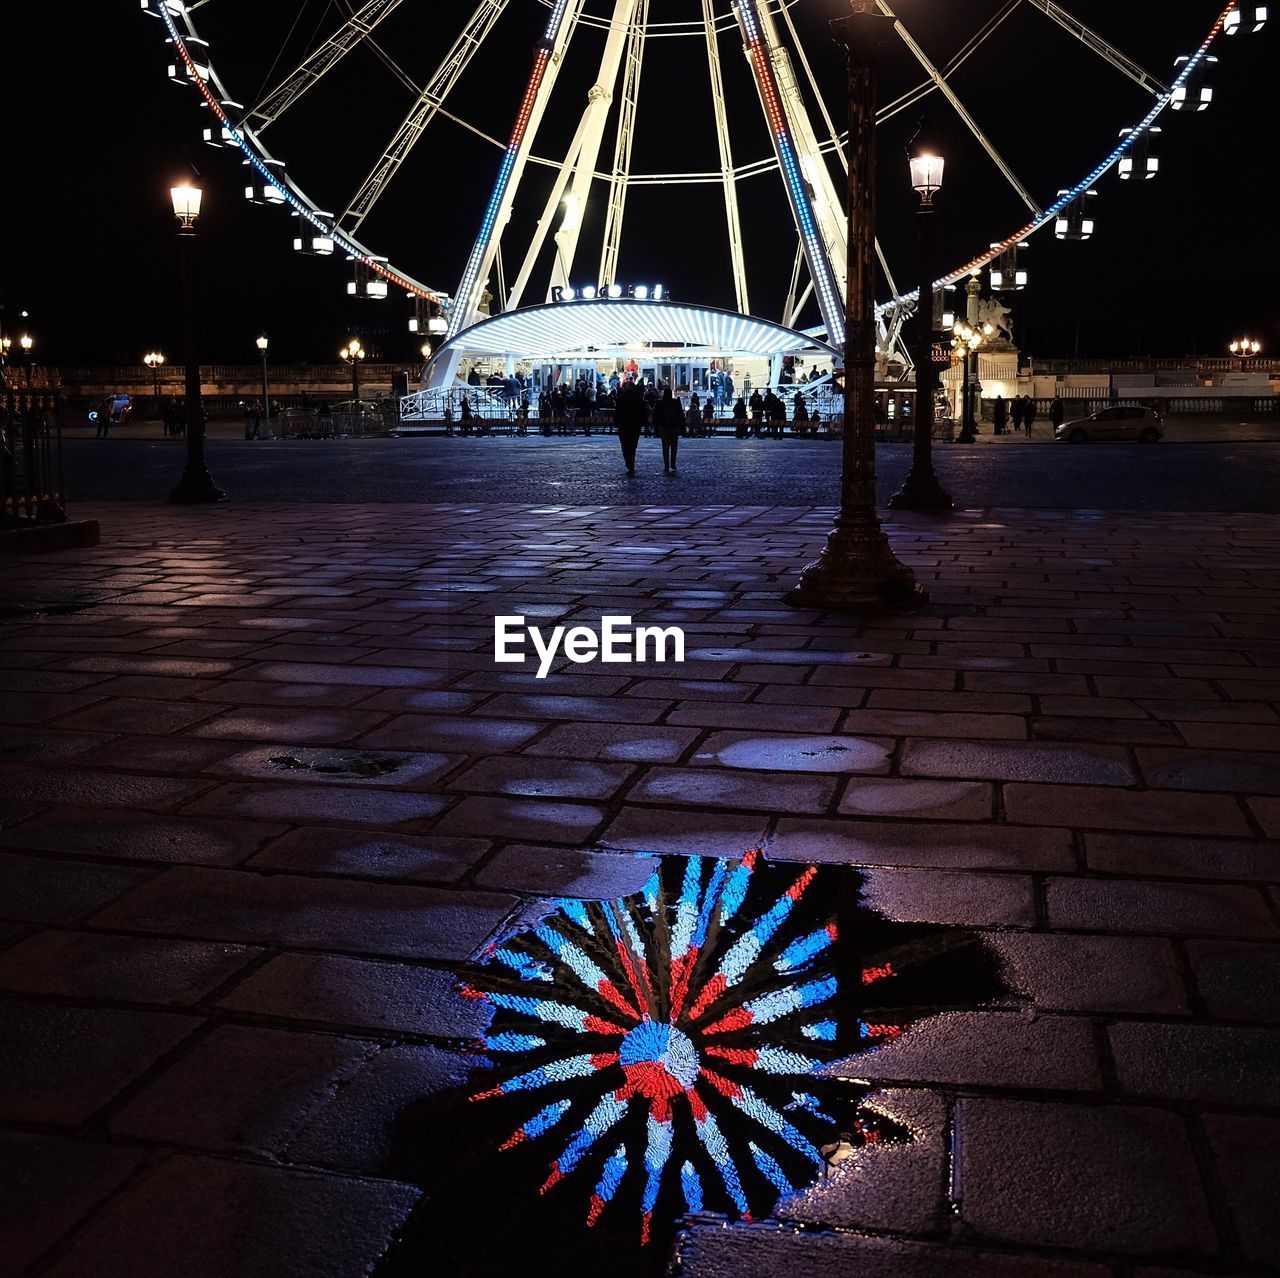 LOW ANGLE VIEW OF ILLUMINATED FERRIS WHEEL IN CITY AT NIGHT